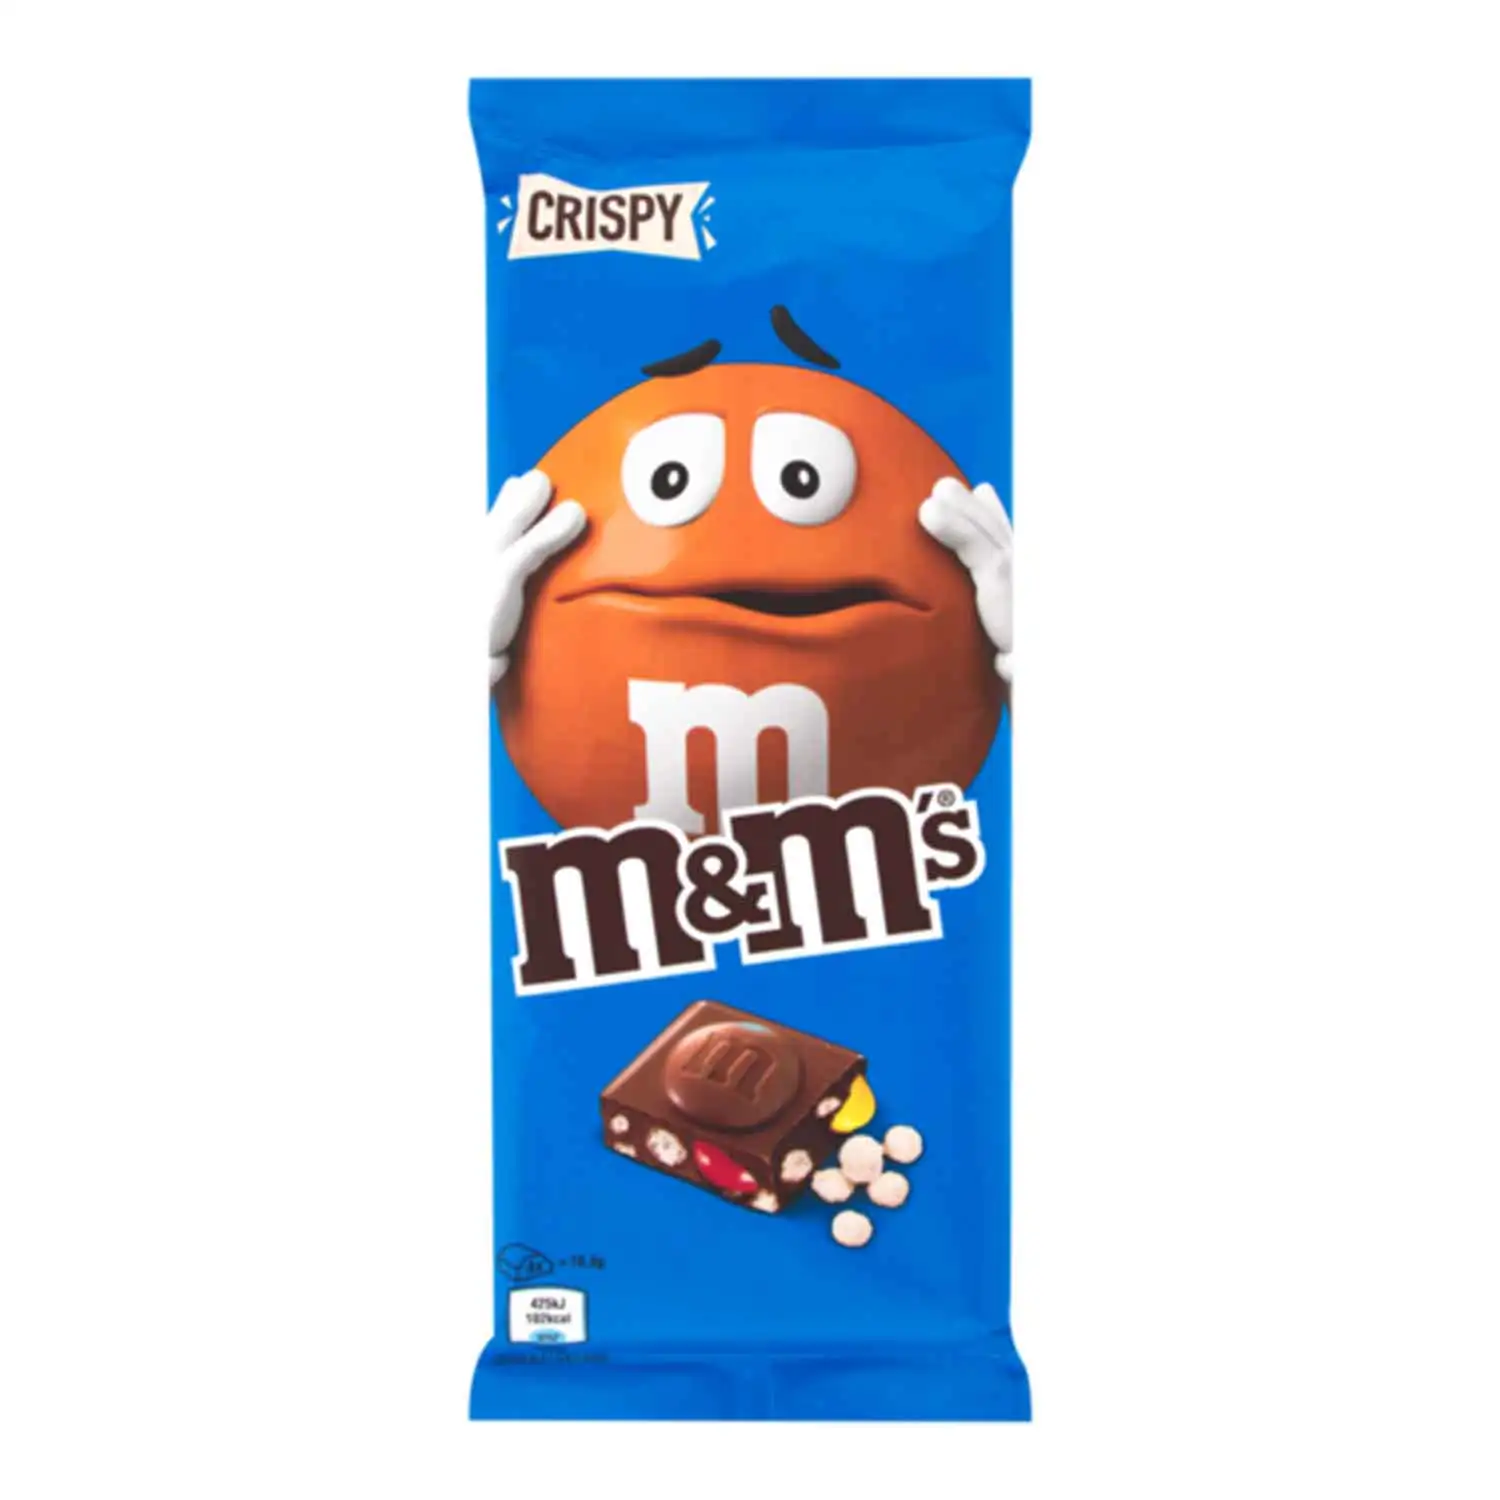 M&M's crispy barre 150g - Buy at Real Tobacco